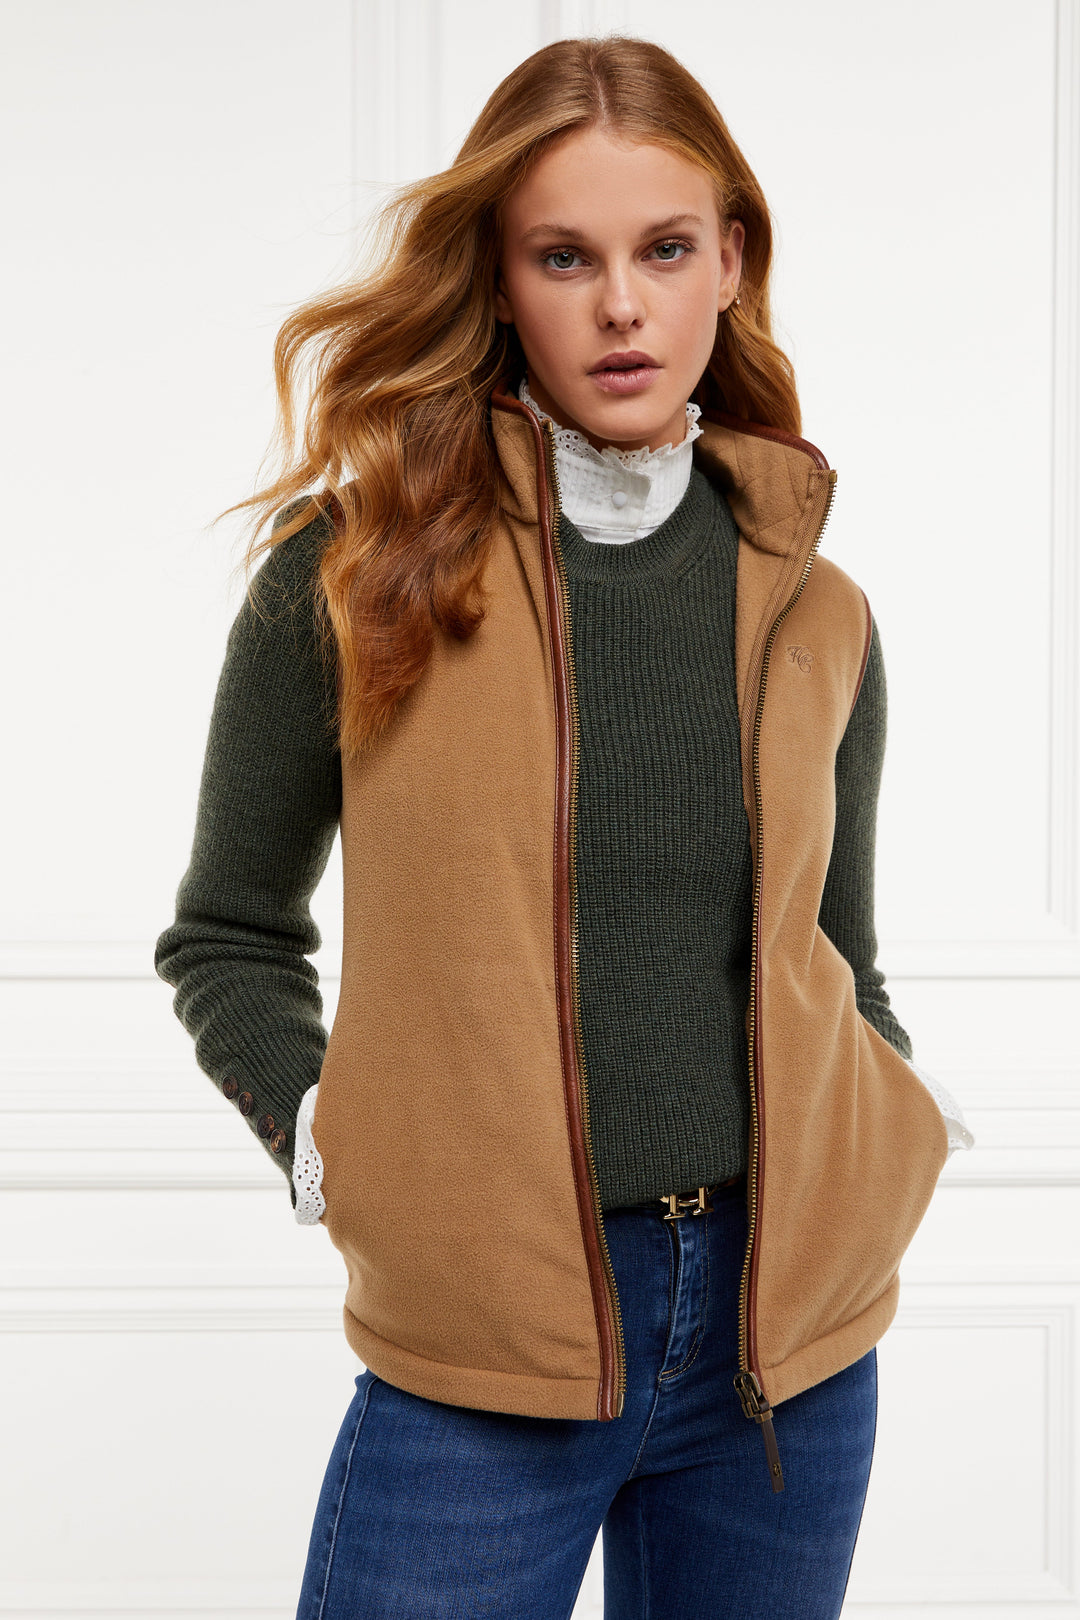 The Holland Cooper Ladies Country Fleece Gilet in Light Brown#Light Brown